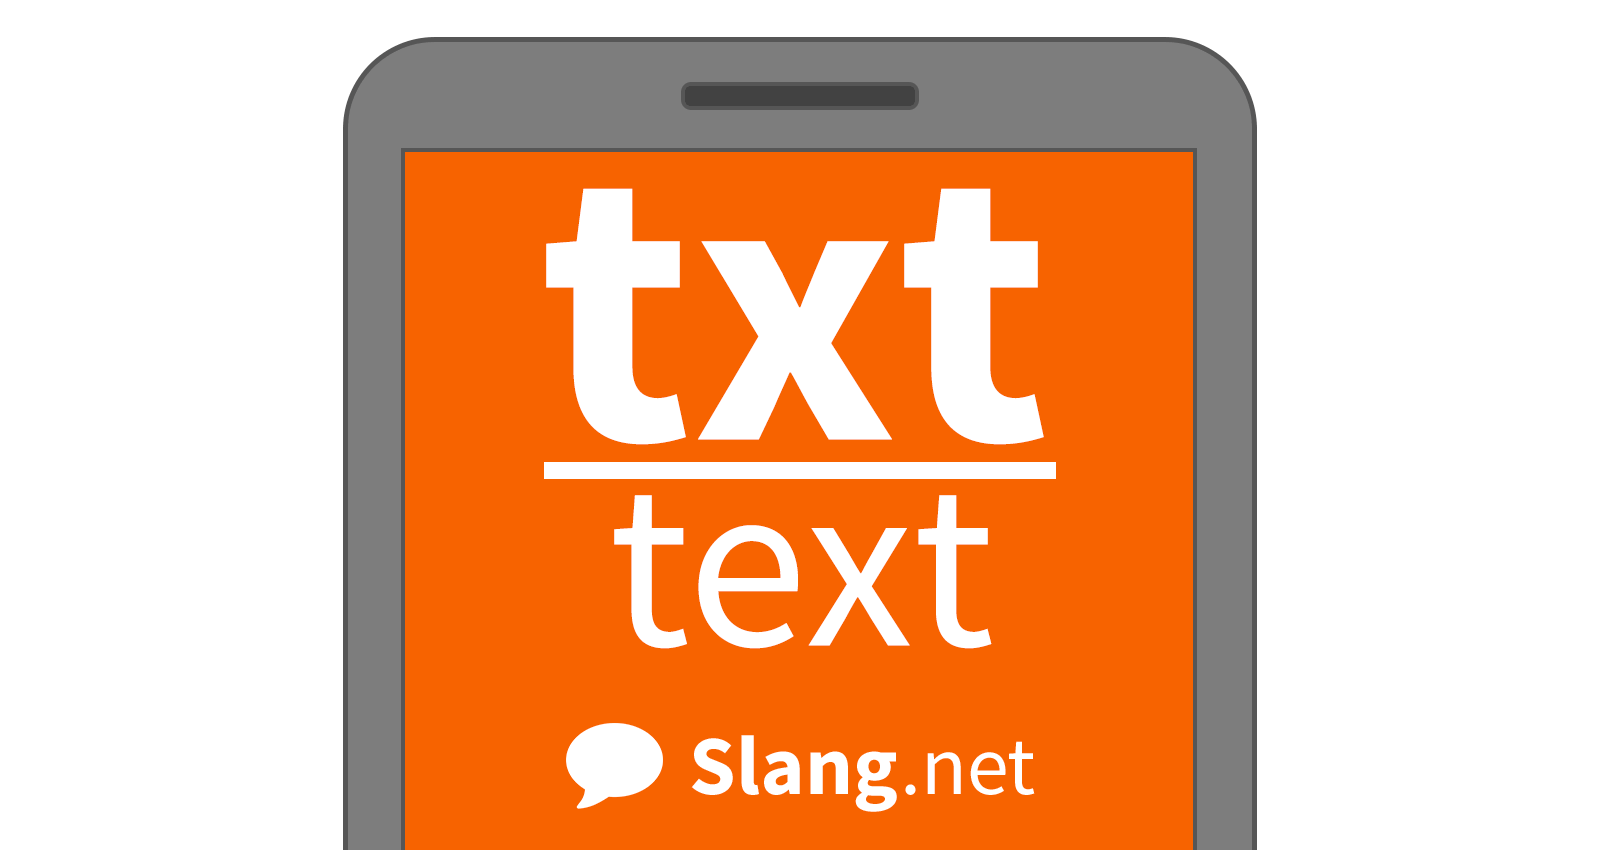 You'll often see txt in texts and online